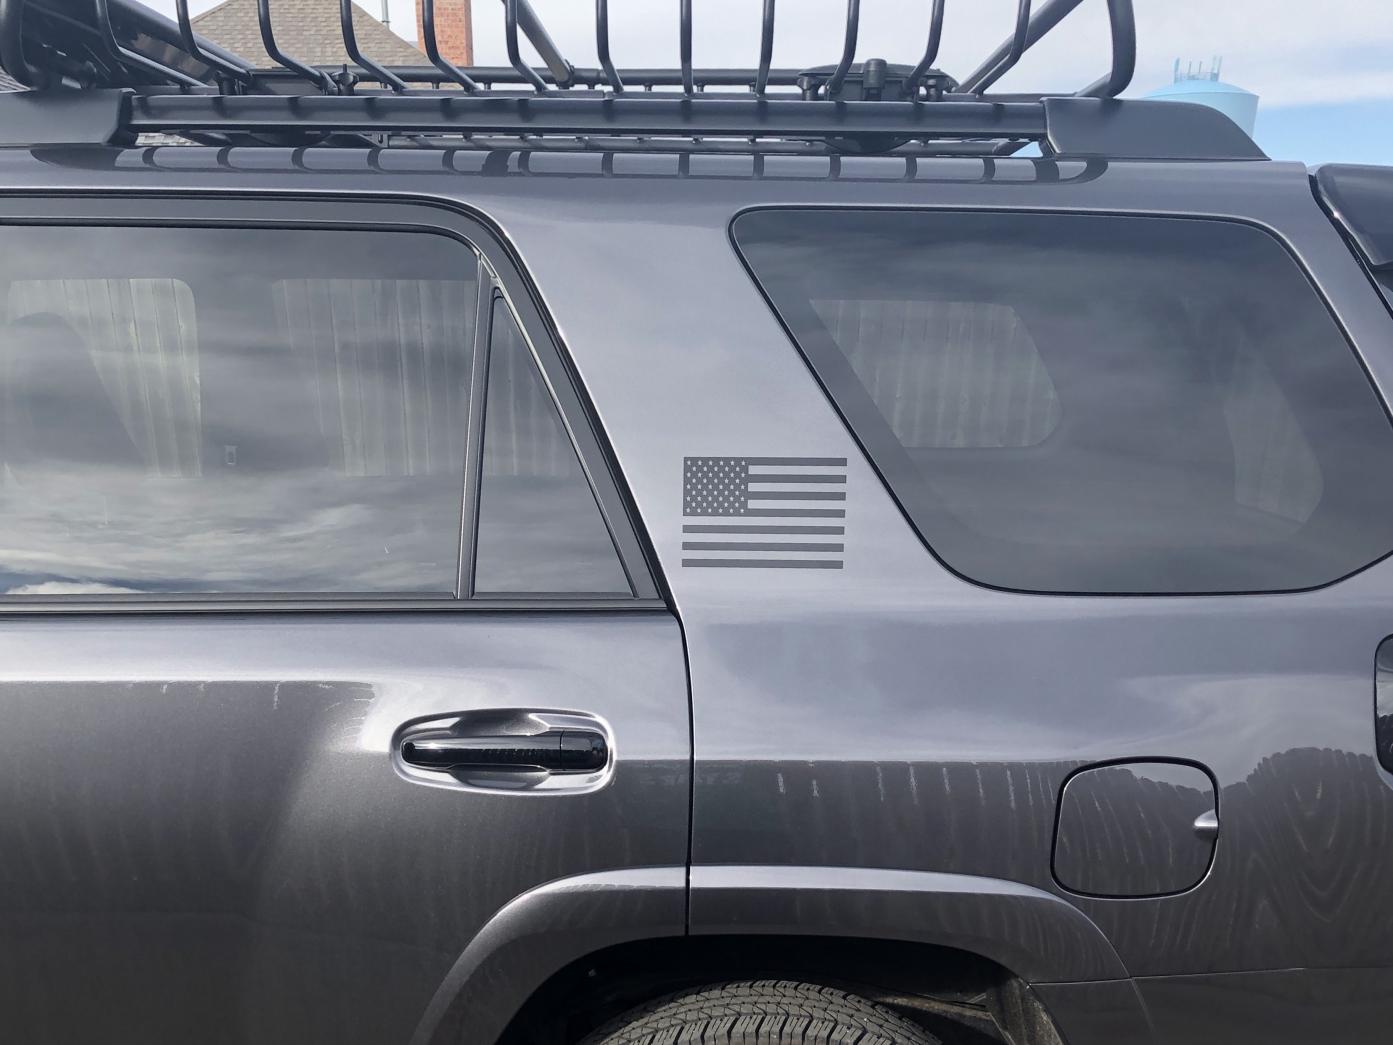 Any other rear window decals besides the American flag?-84f27825-25d0-4202-85c5-2d1b355a81ea-jpg